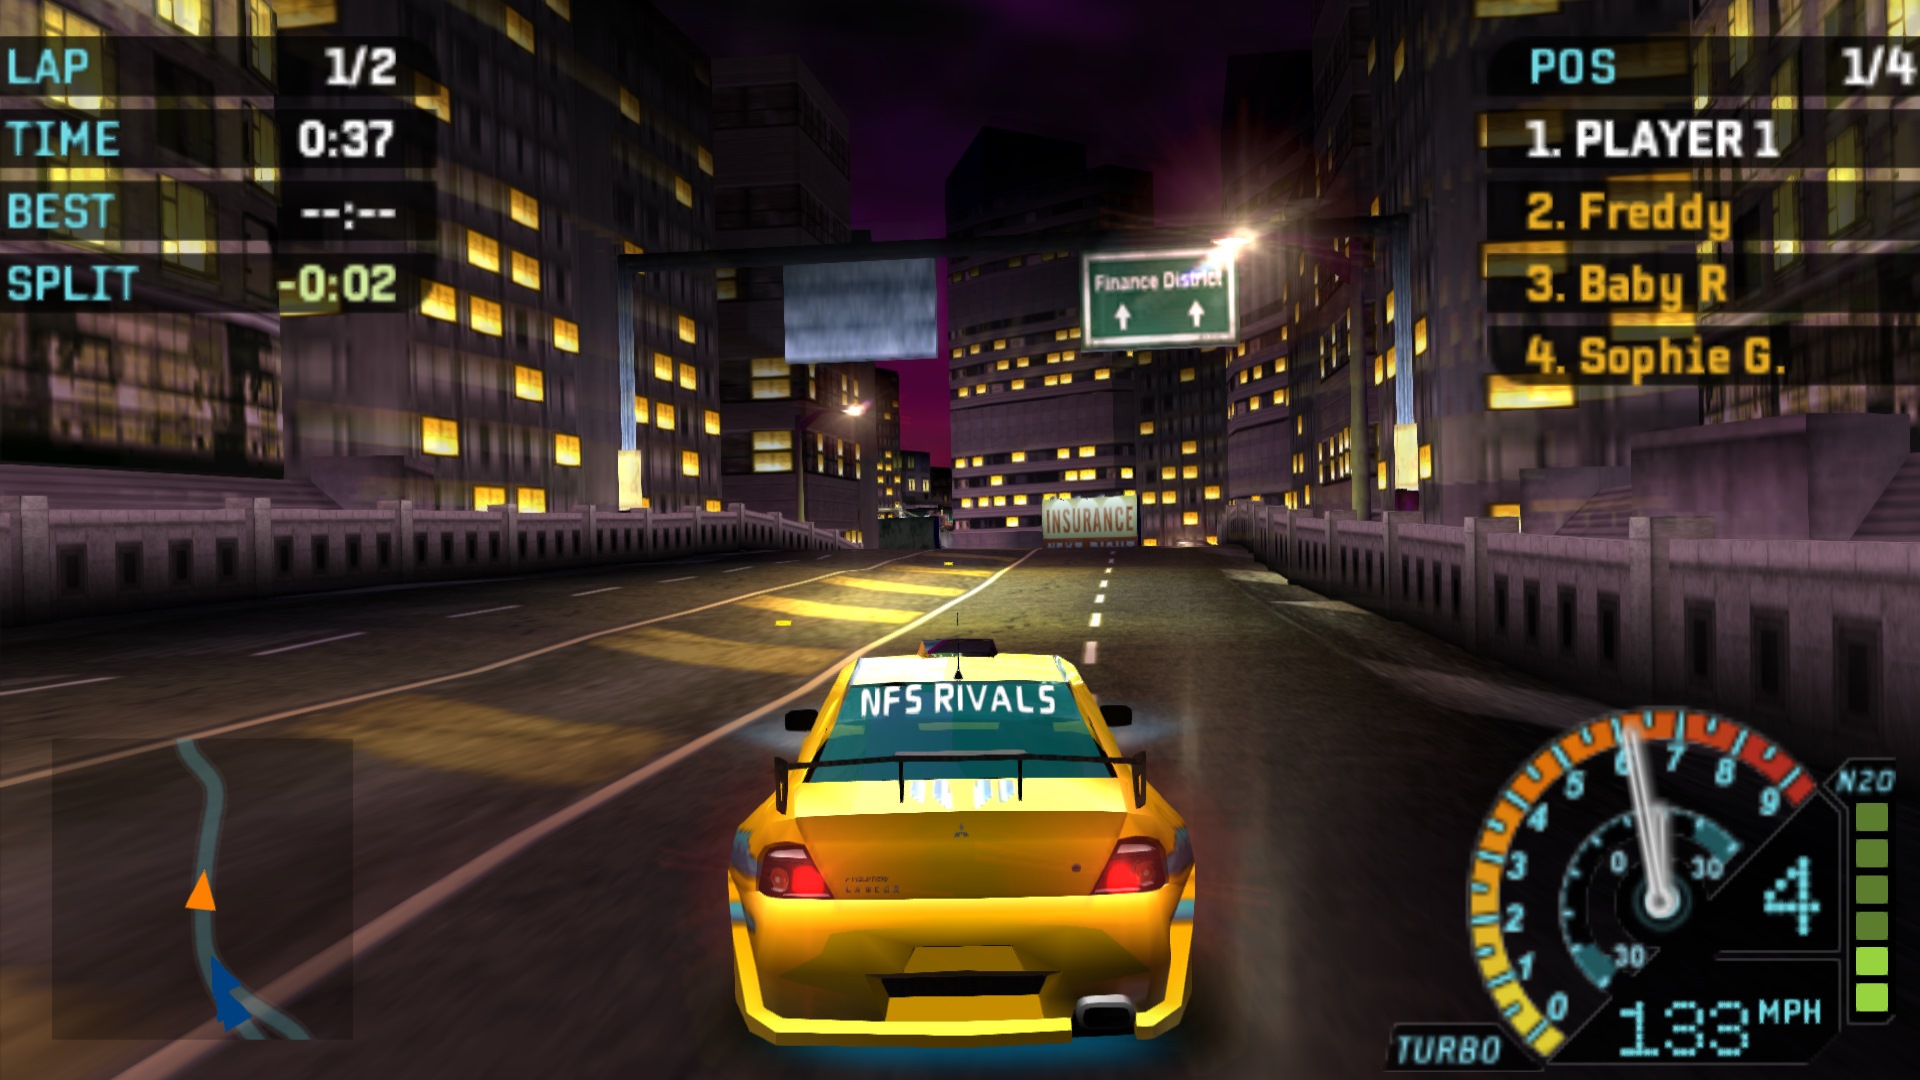 Juegos De Ppsspp Need For Speed Mega